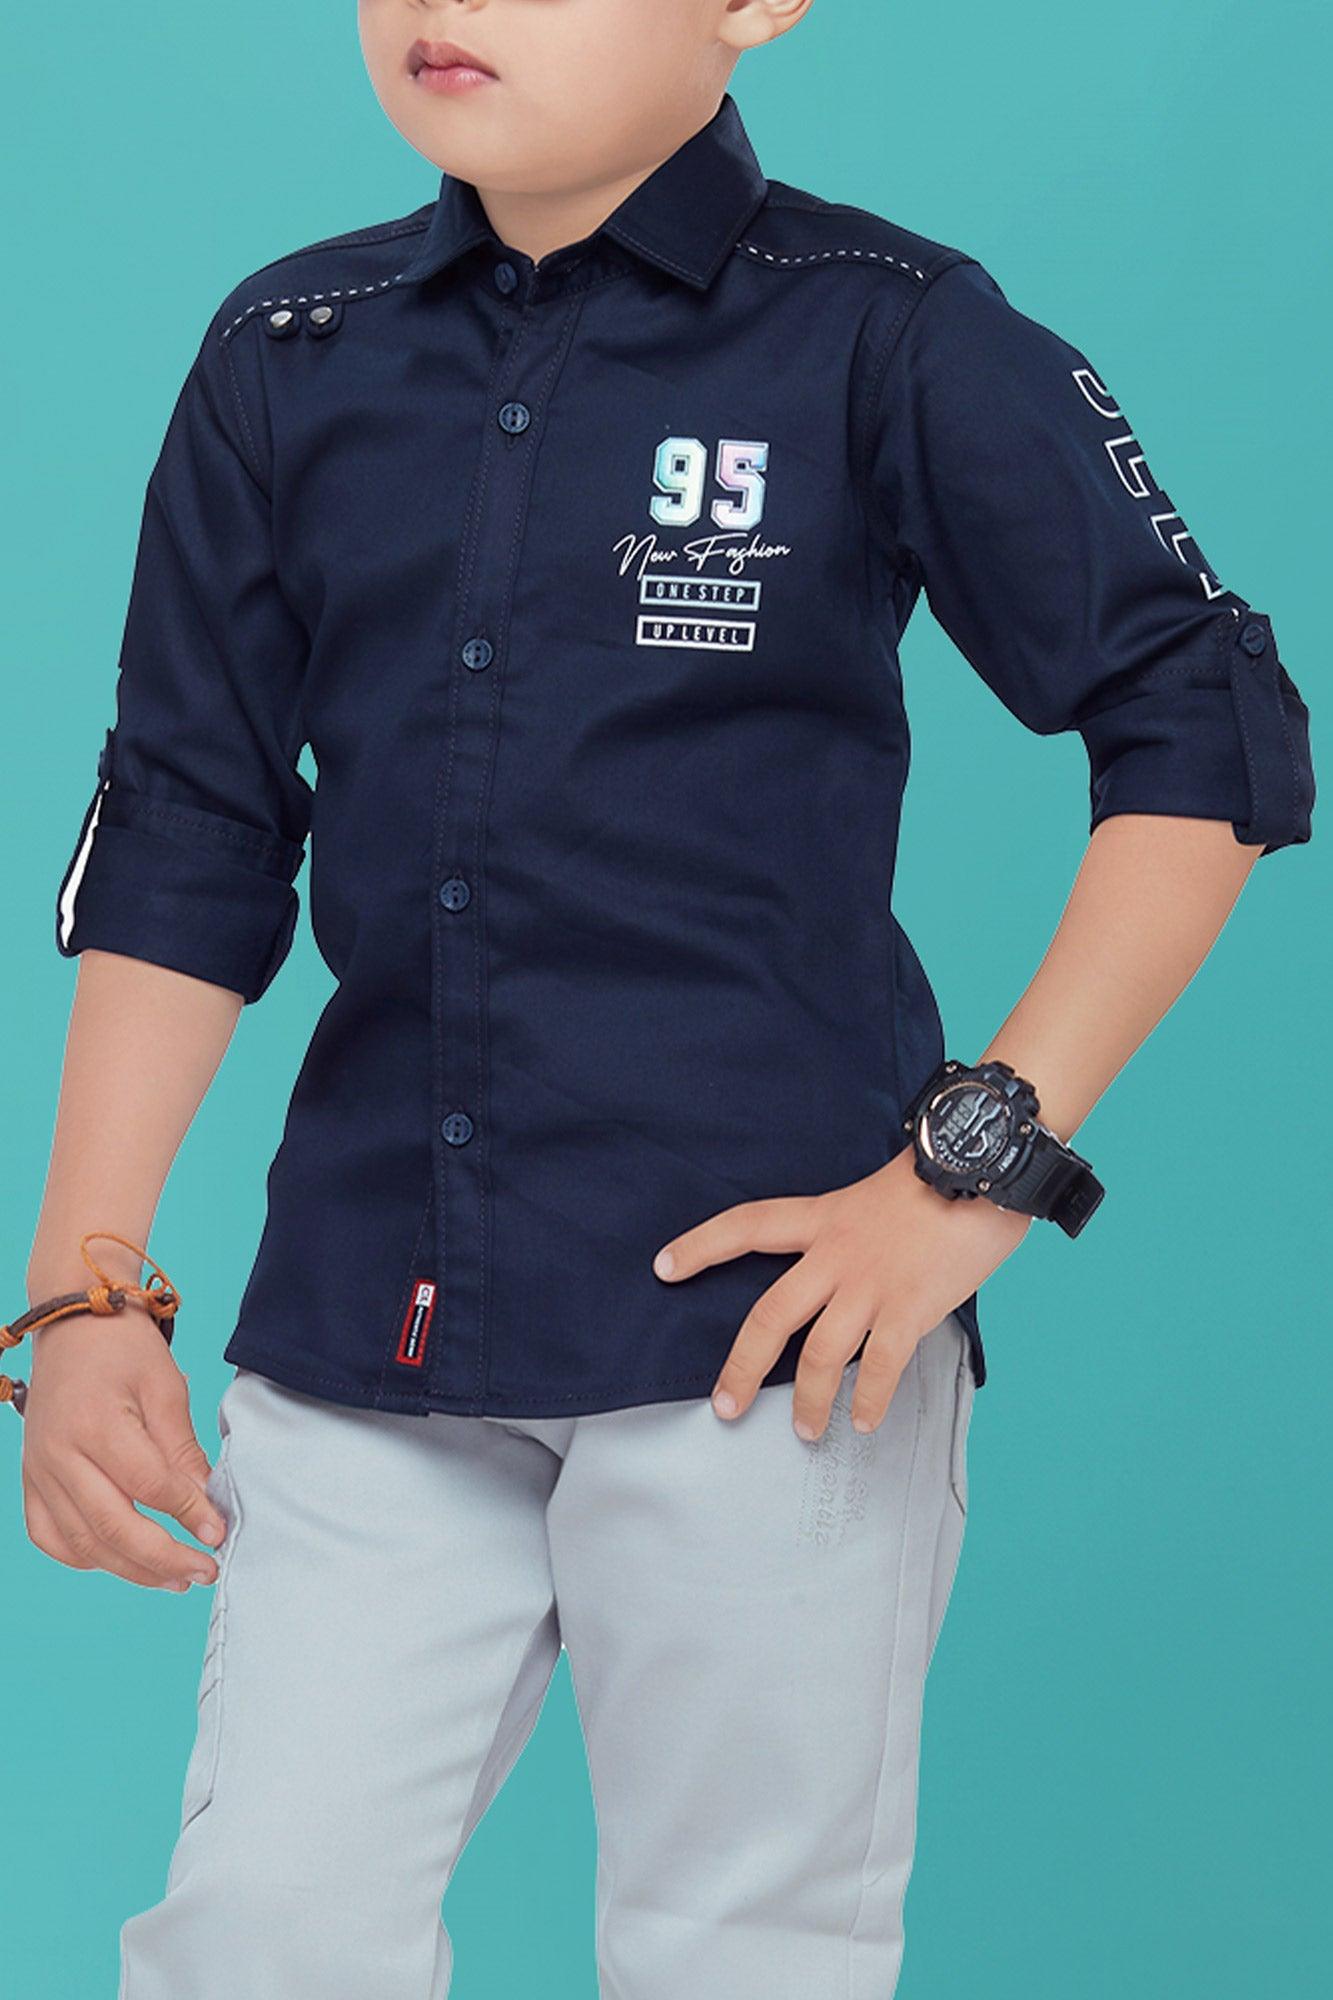 Buy Genre Over Navy Blue Cargo Pants Outfit – Address Apparels